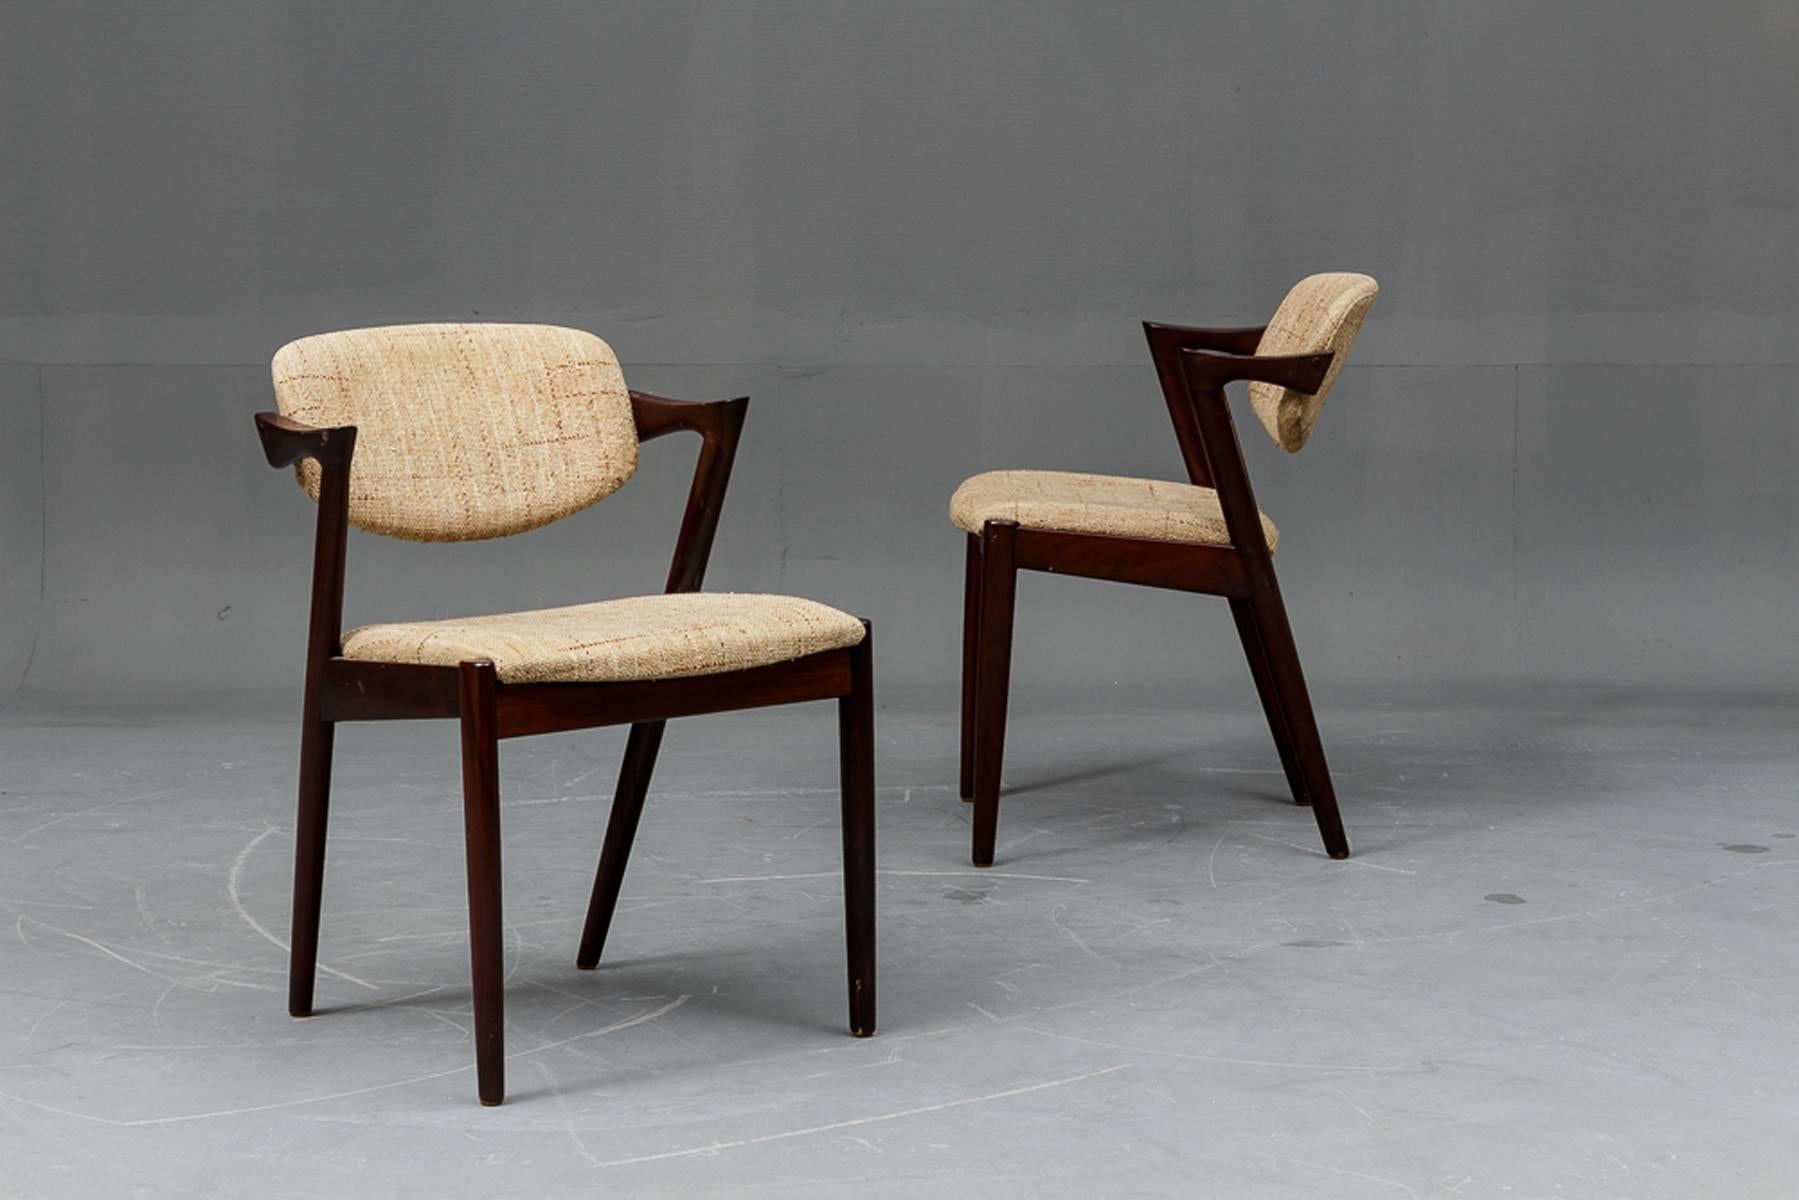 Dining chairs, model 42, designed by Kai Kristiansen and manufactured in Denmark by Schou Andersen Møbelfabrik. The chairs are made from solid hardwood, featuring tapered legs, curved armrests and wool upholstery. Good vintage condition.
New